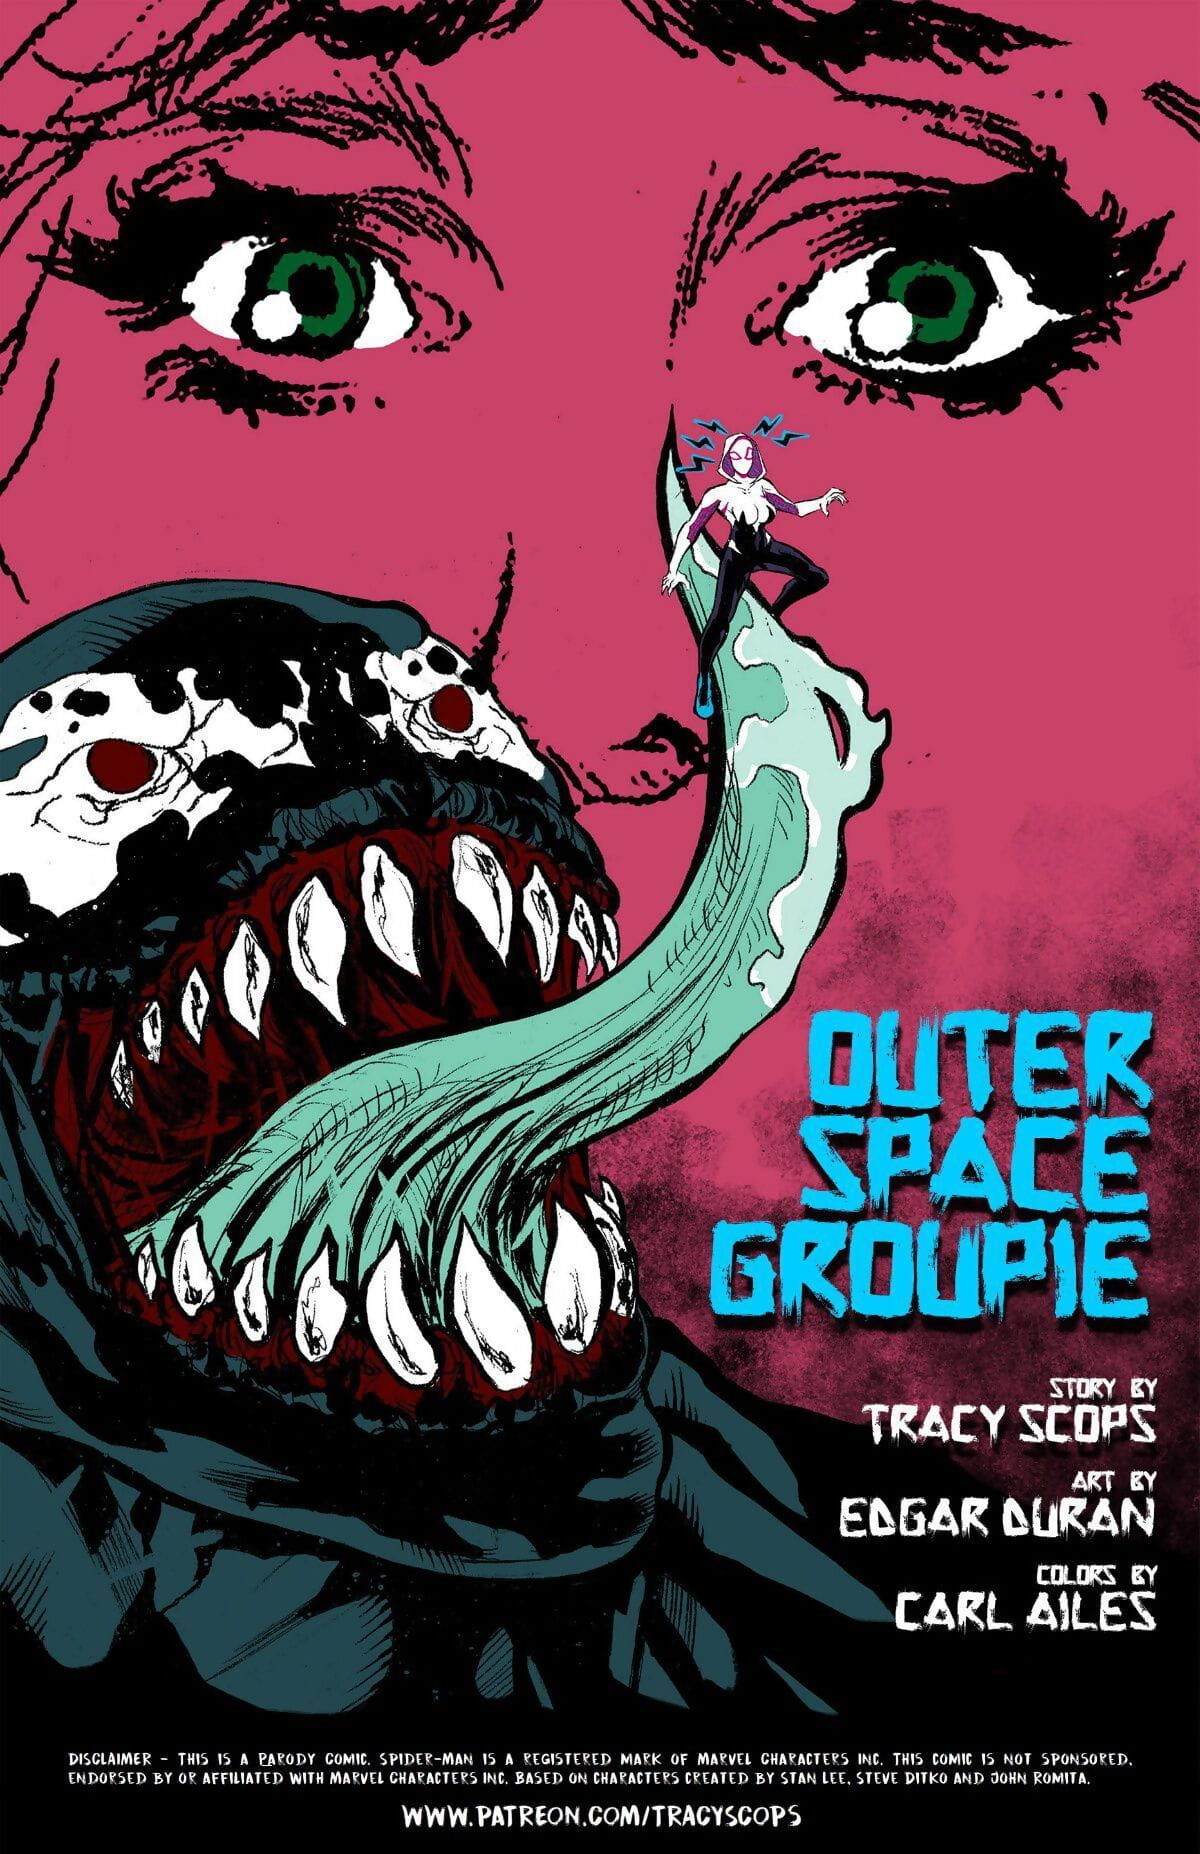 Tracy Scops- Outerspace Groupie- Edgar Duran page 1